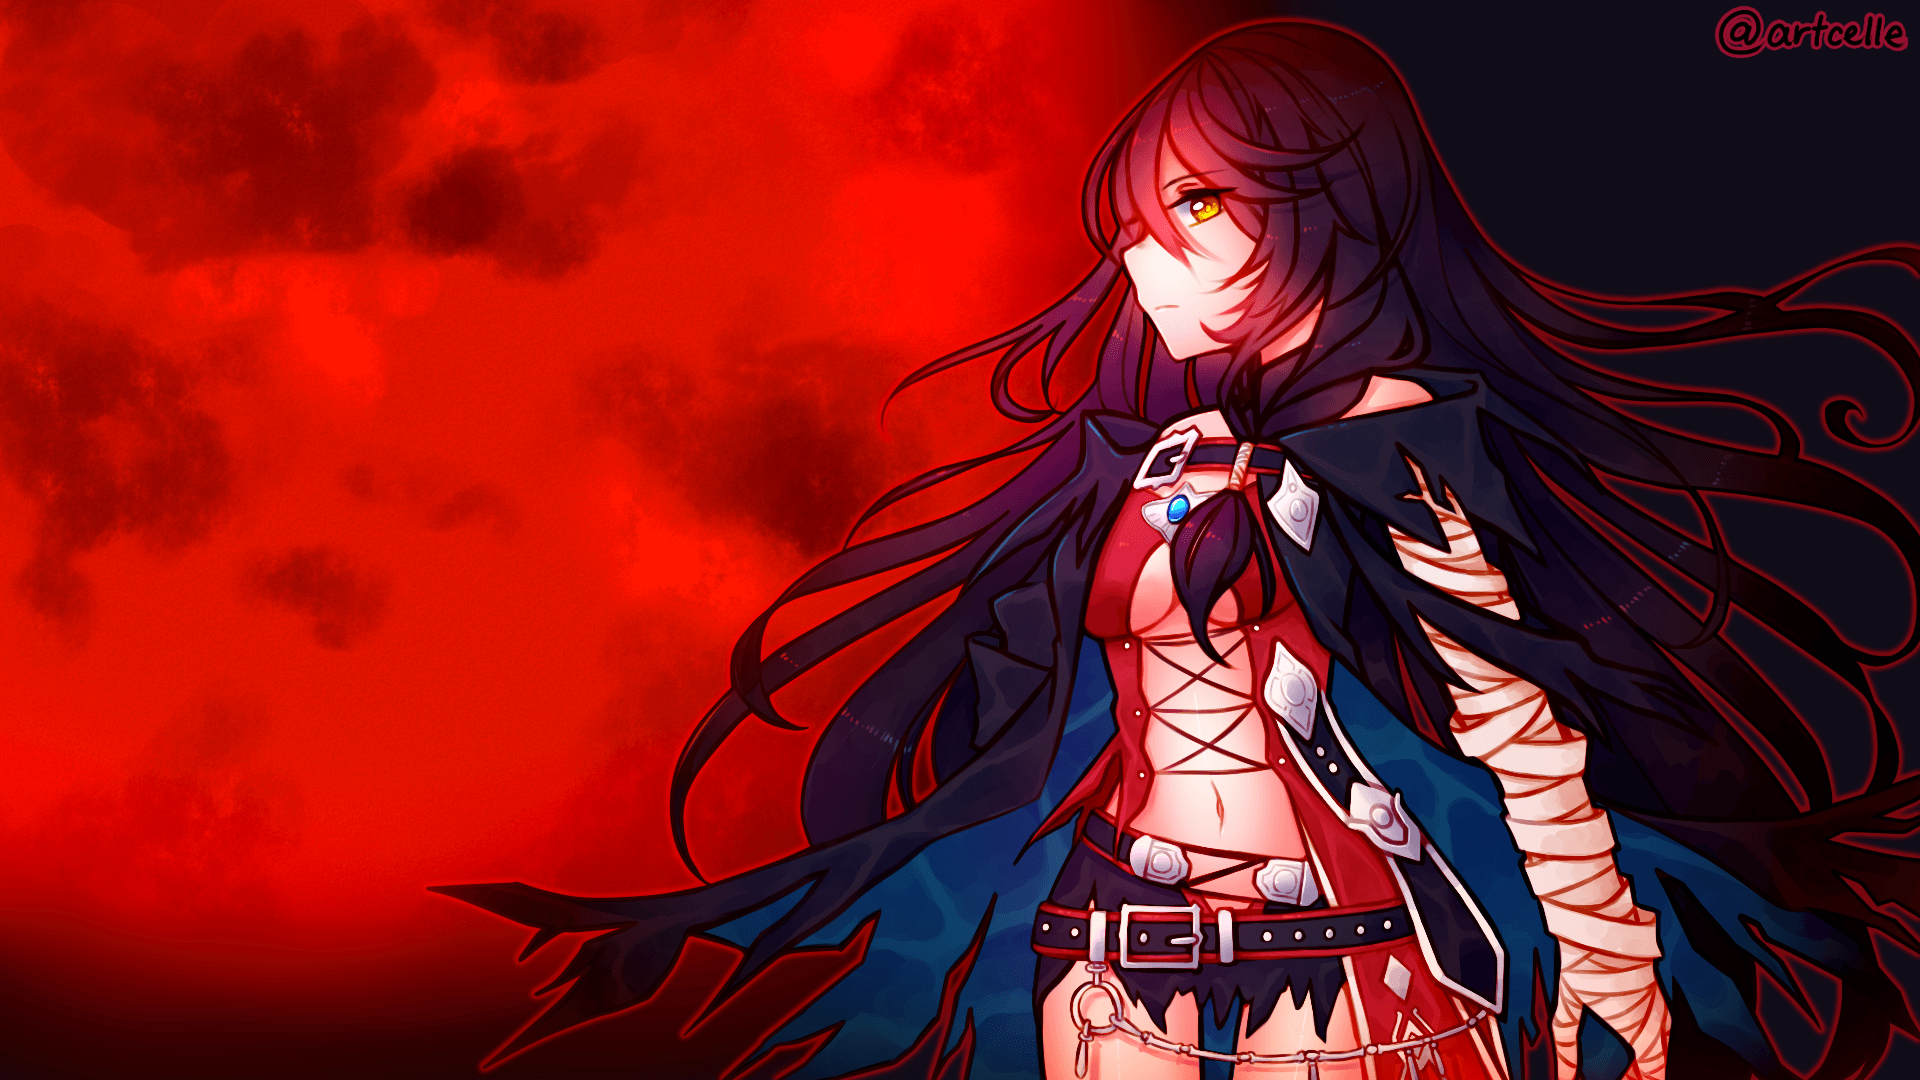 Dropping off a Velvet wallpaper that I just finished making, hehe